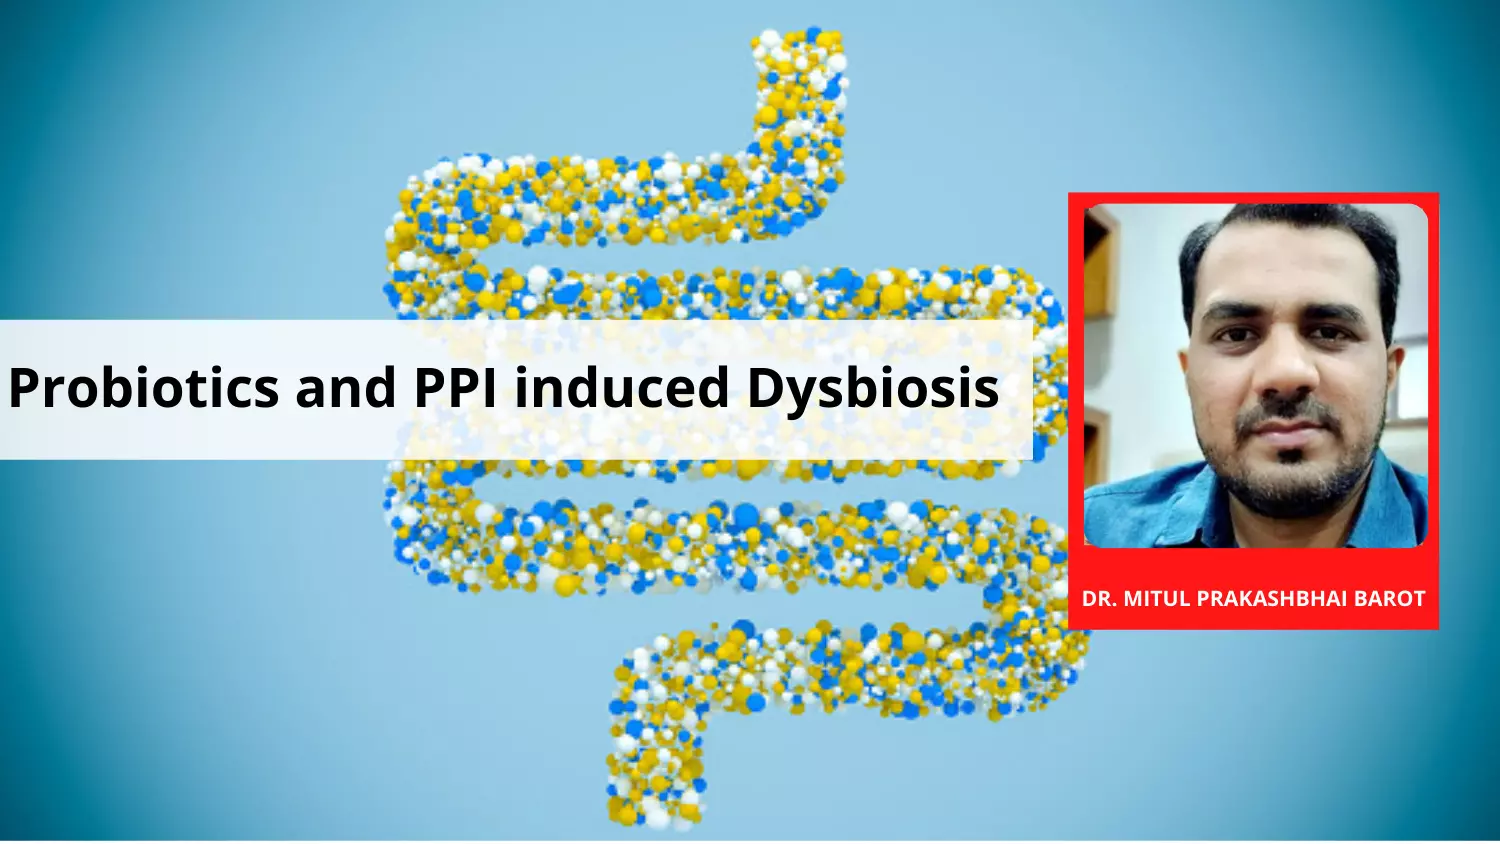 Analyzing Proton pump inhibitor (PPI) induced dysbiosis and growing role of probiotics: Review